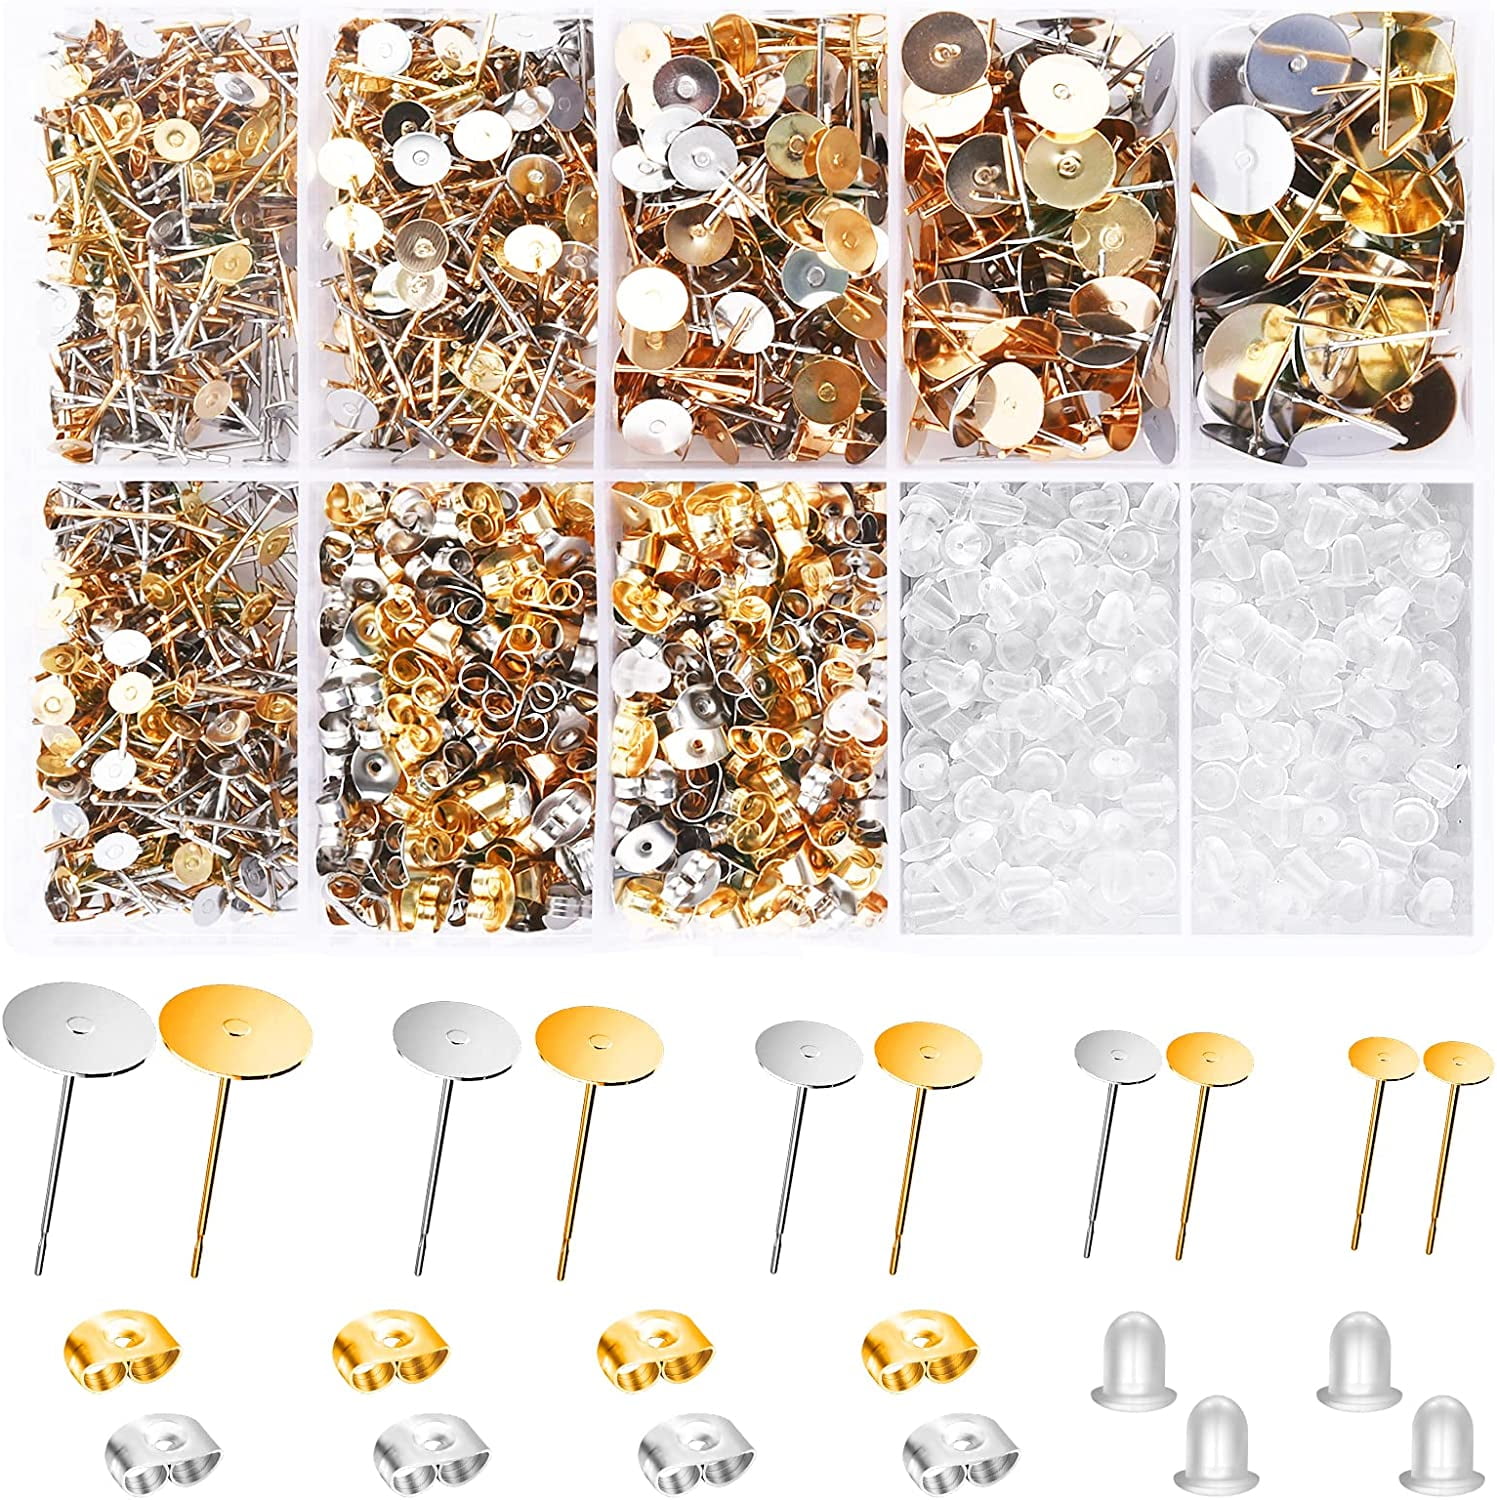 Hypoallergenic Earring Posts and Backs, Southwit 1800pcs Stainless Steel Stud Earring Kit with Earring Base Studs, Earring Backs and Jump Rings for